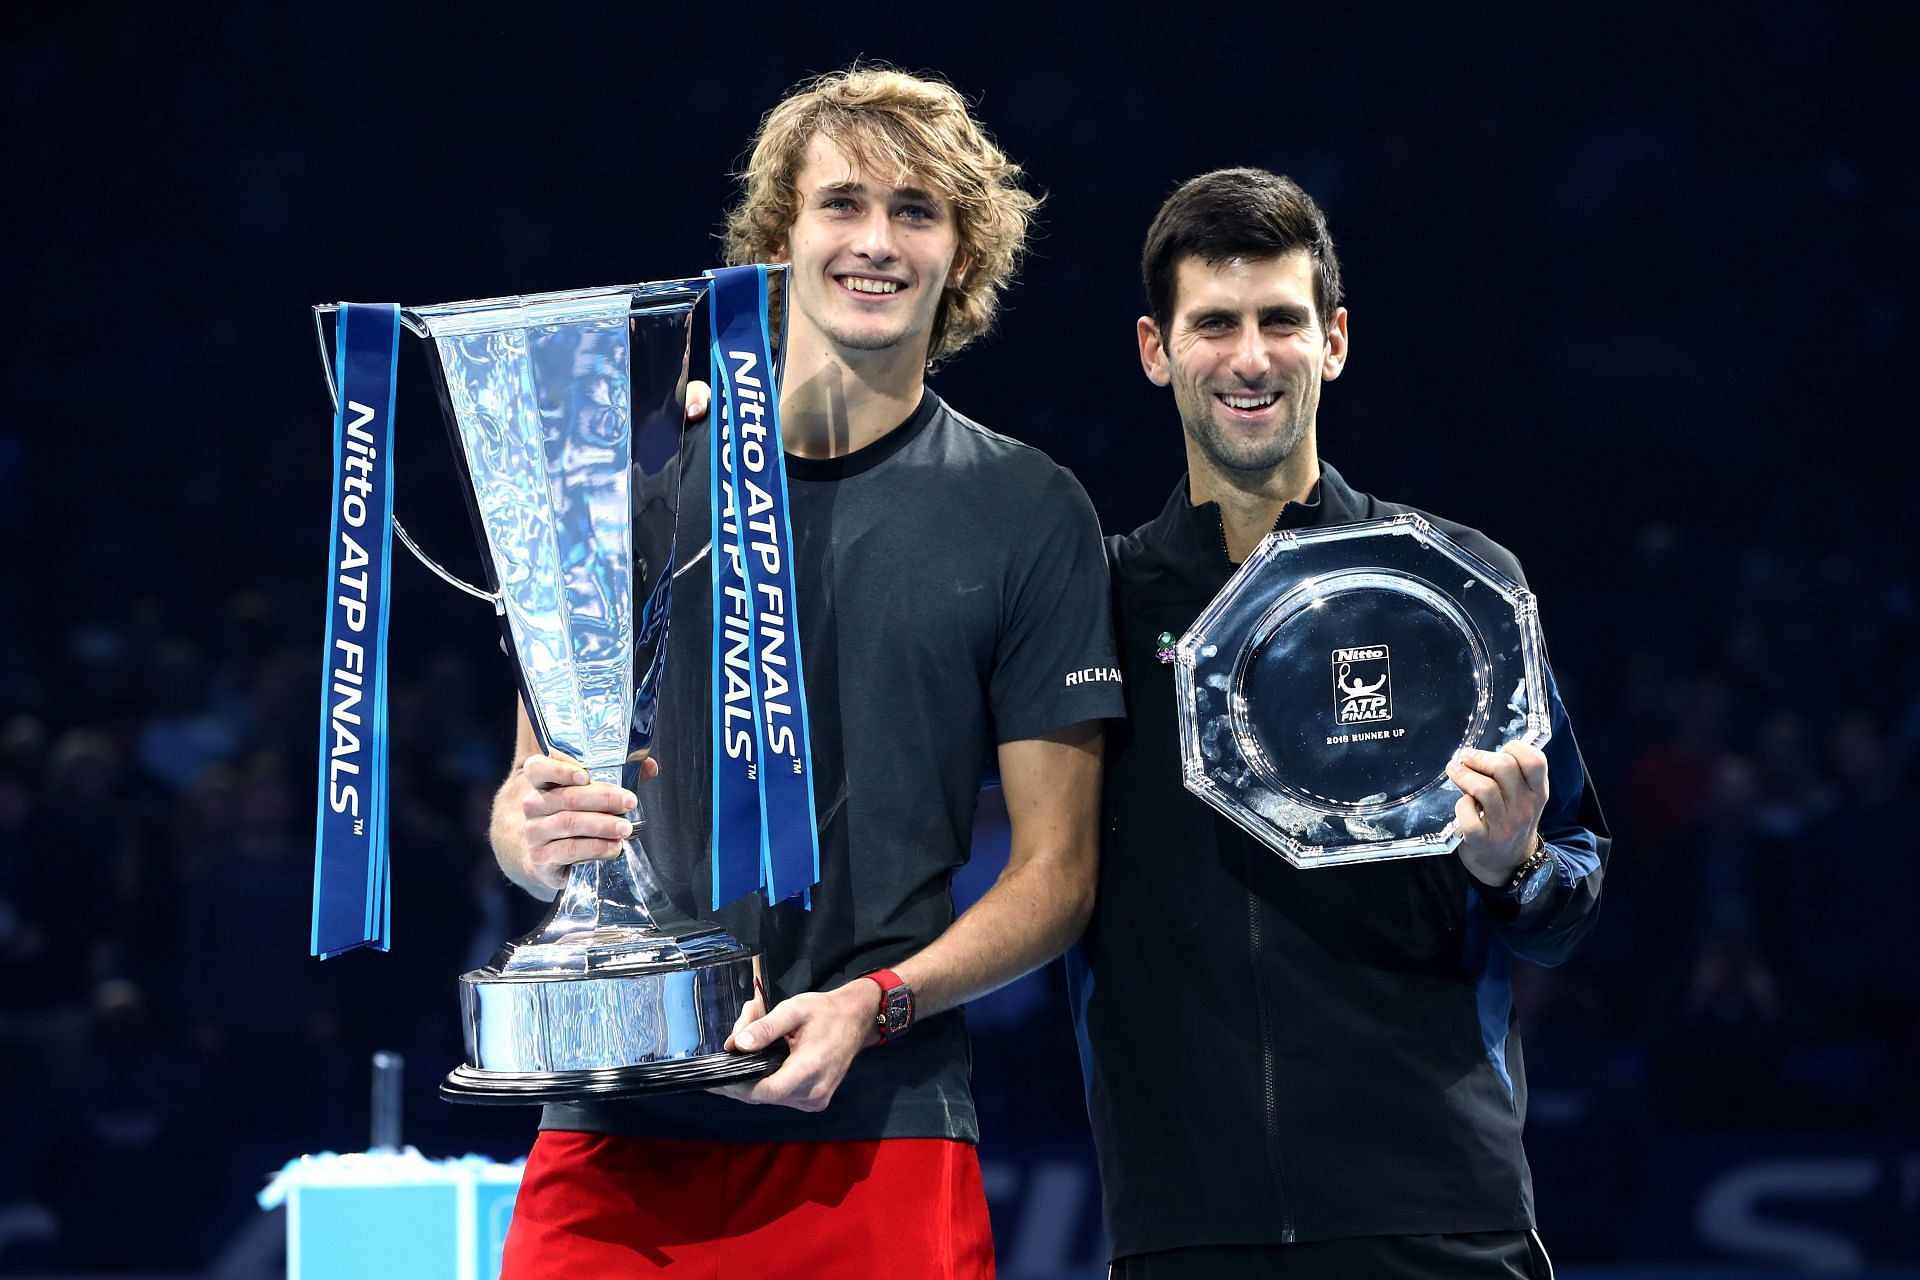 Alexander Zverev has beaten Nadal and Federer once on clay and grass, and Djokovic thrice on hardcourt